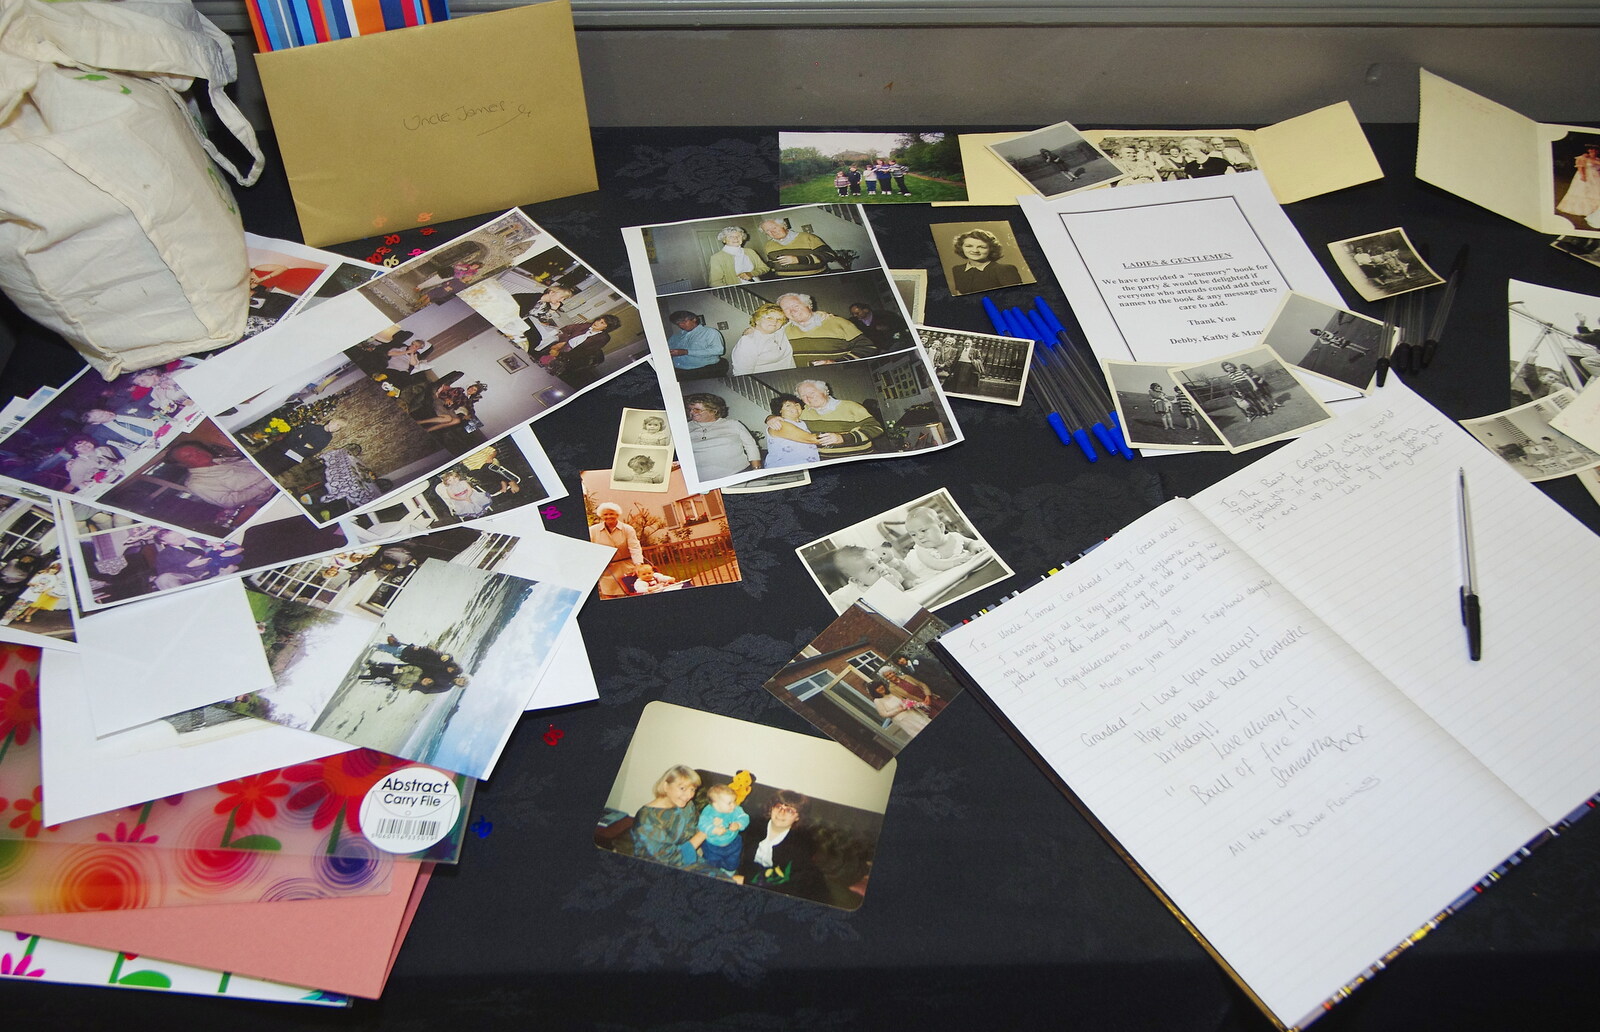 A collection of memorabilia from Uncle James's Ninetieth Birthday, Cheadle Hulme, Manchester - 20th April 2013